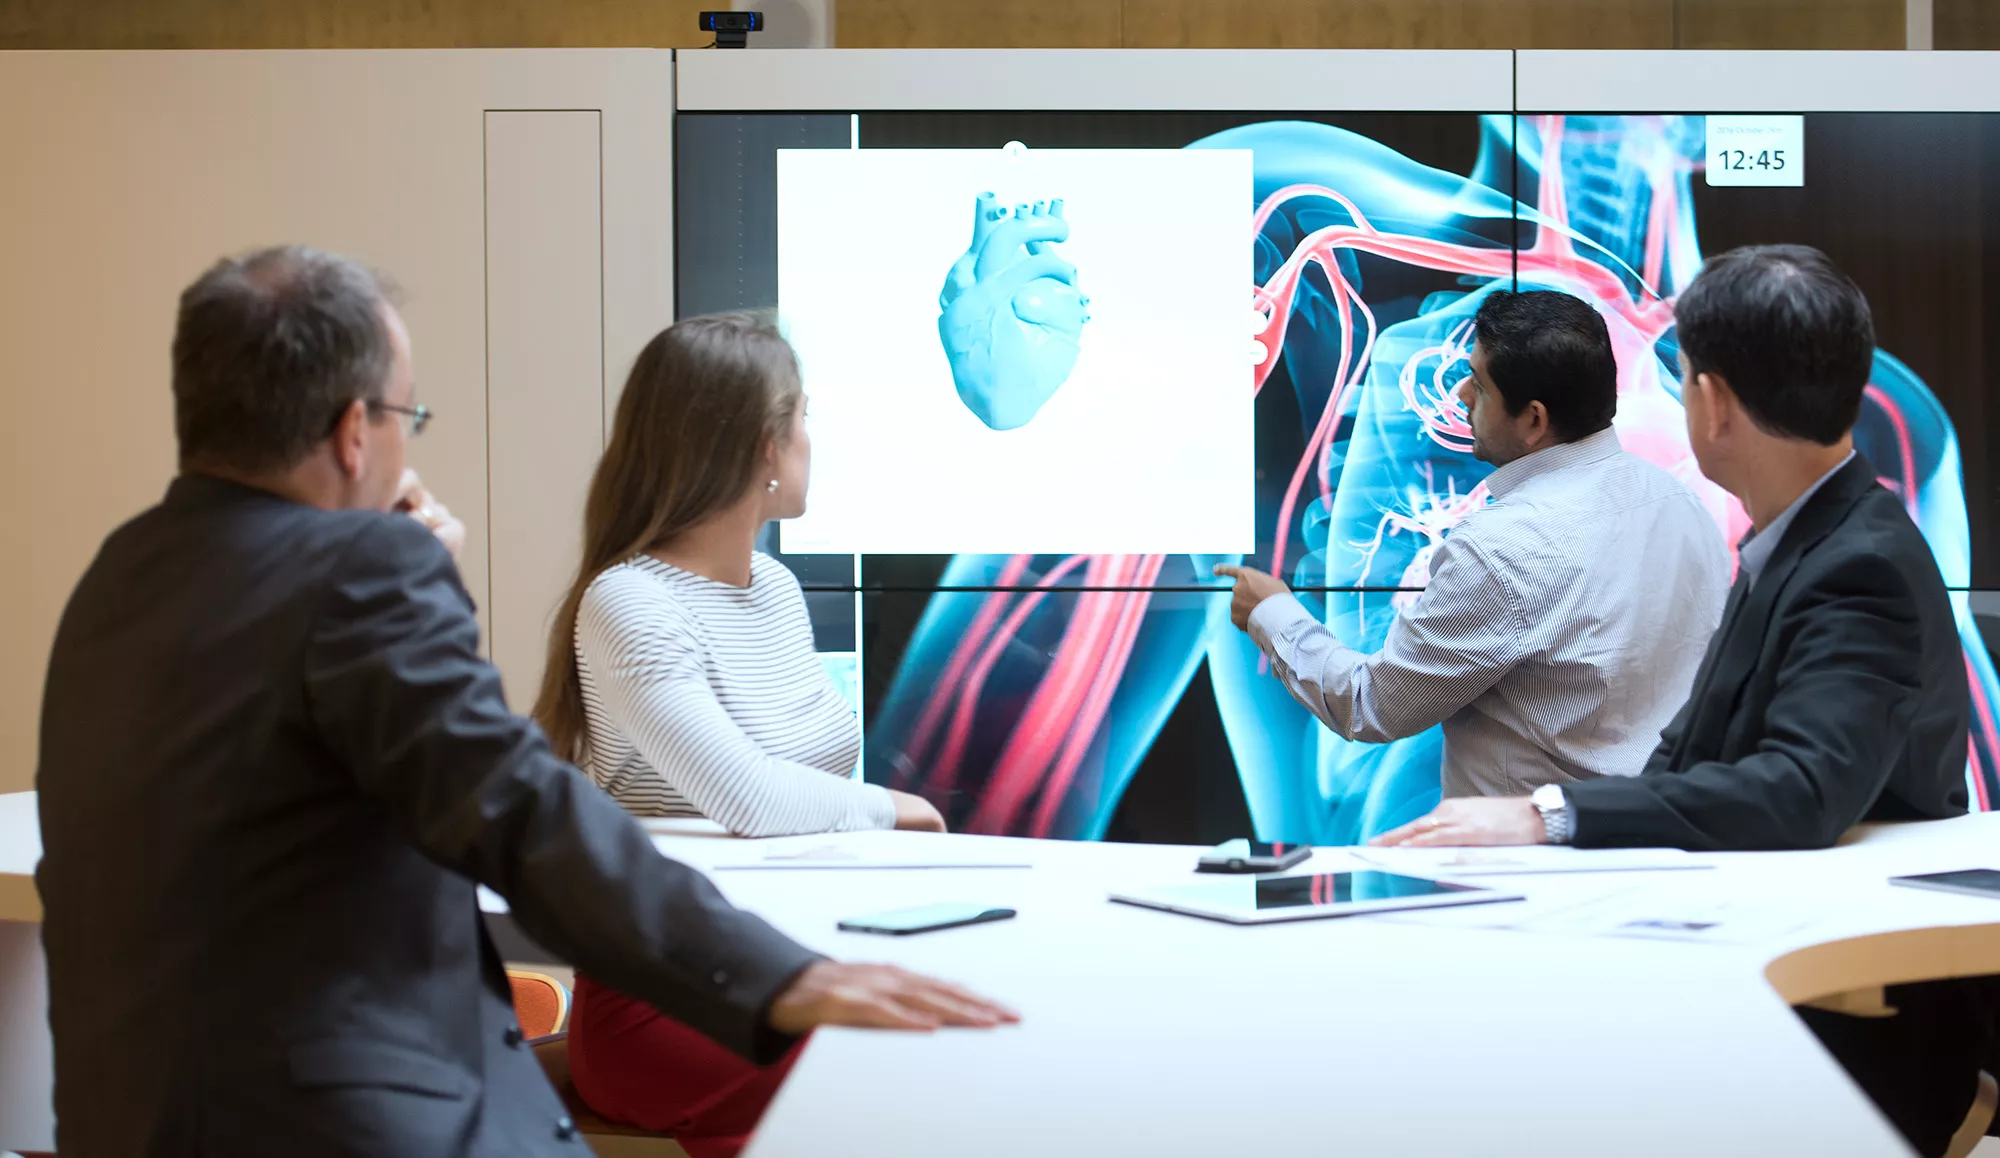 Business people in a meeting room looking at a screen displaying a 3D heart